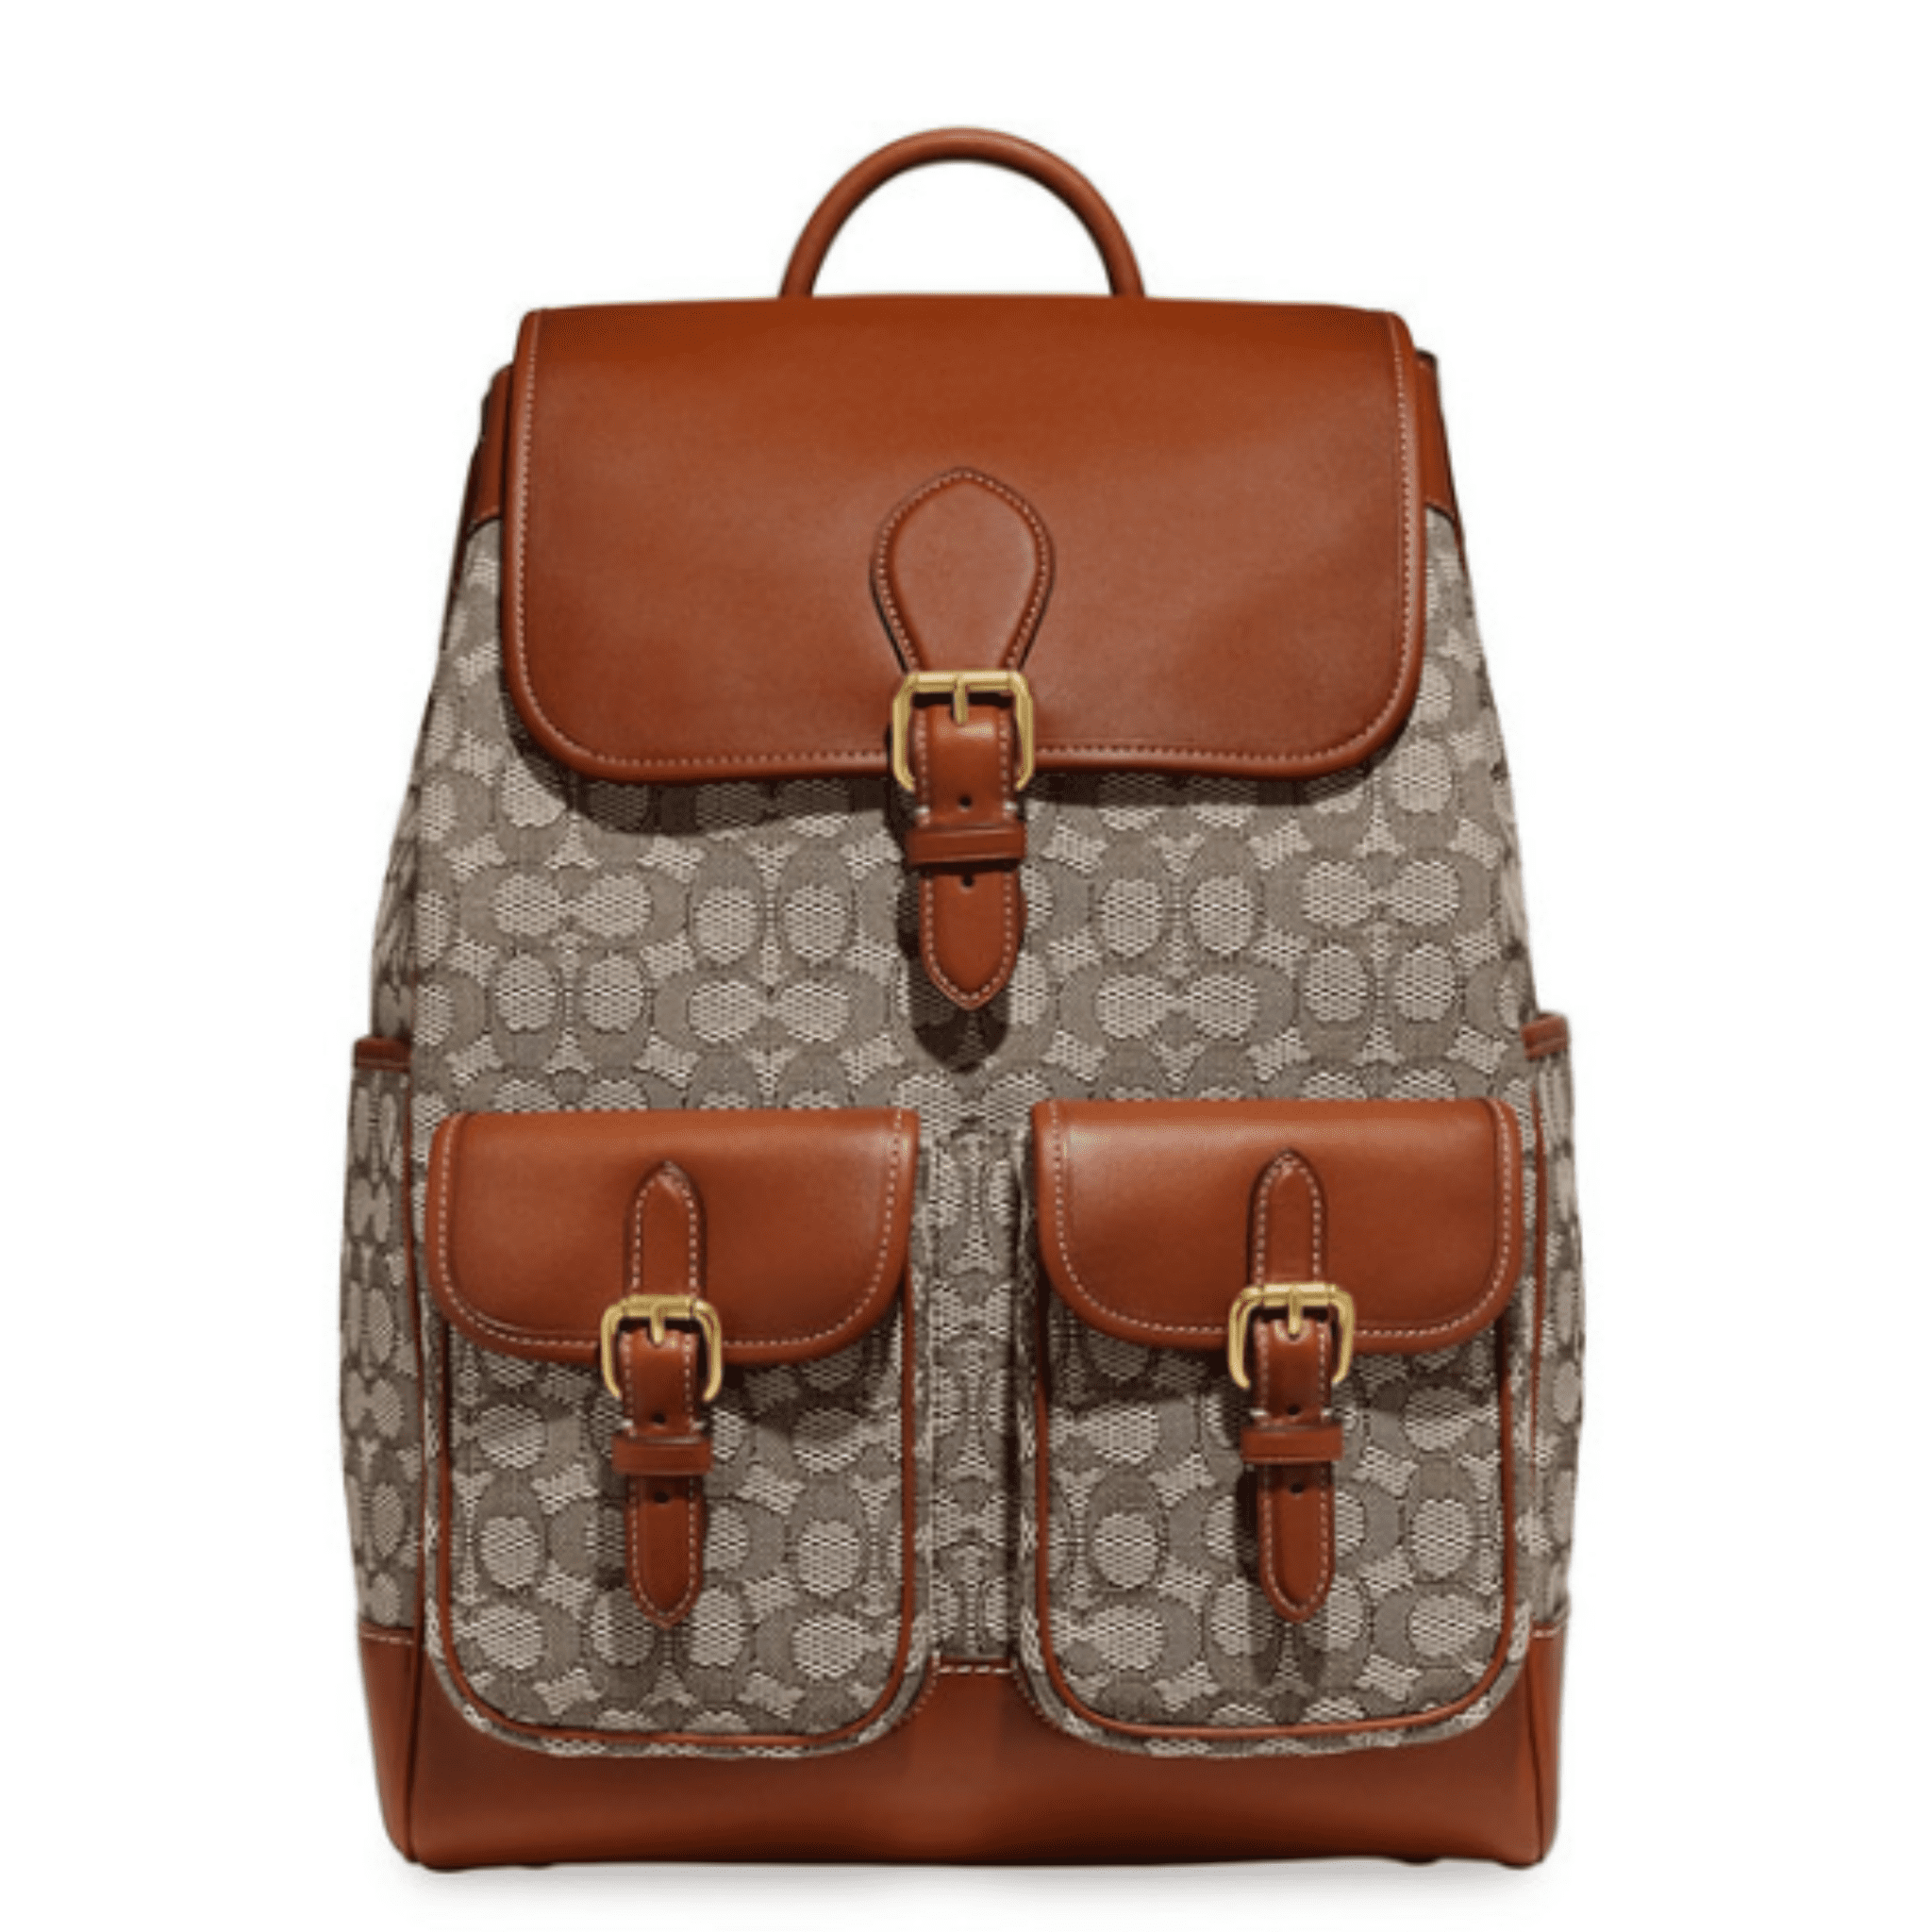 Coach Backpack with brown leather accents and gold buckle pockets.